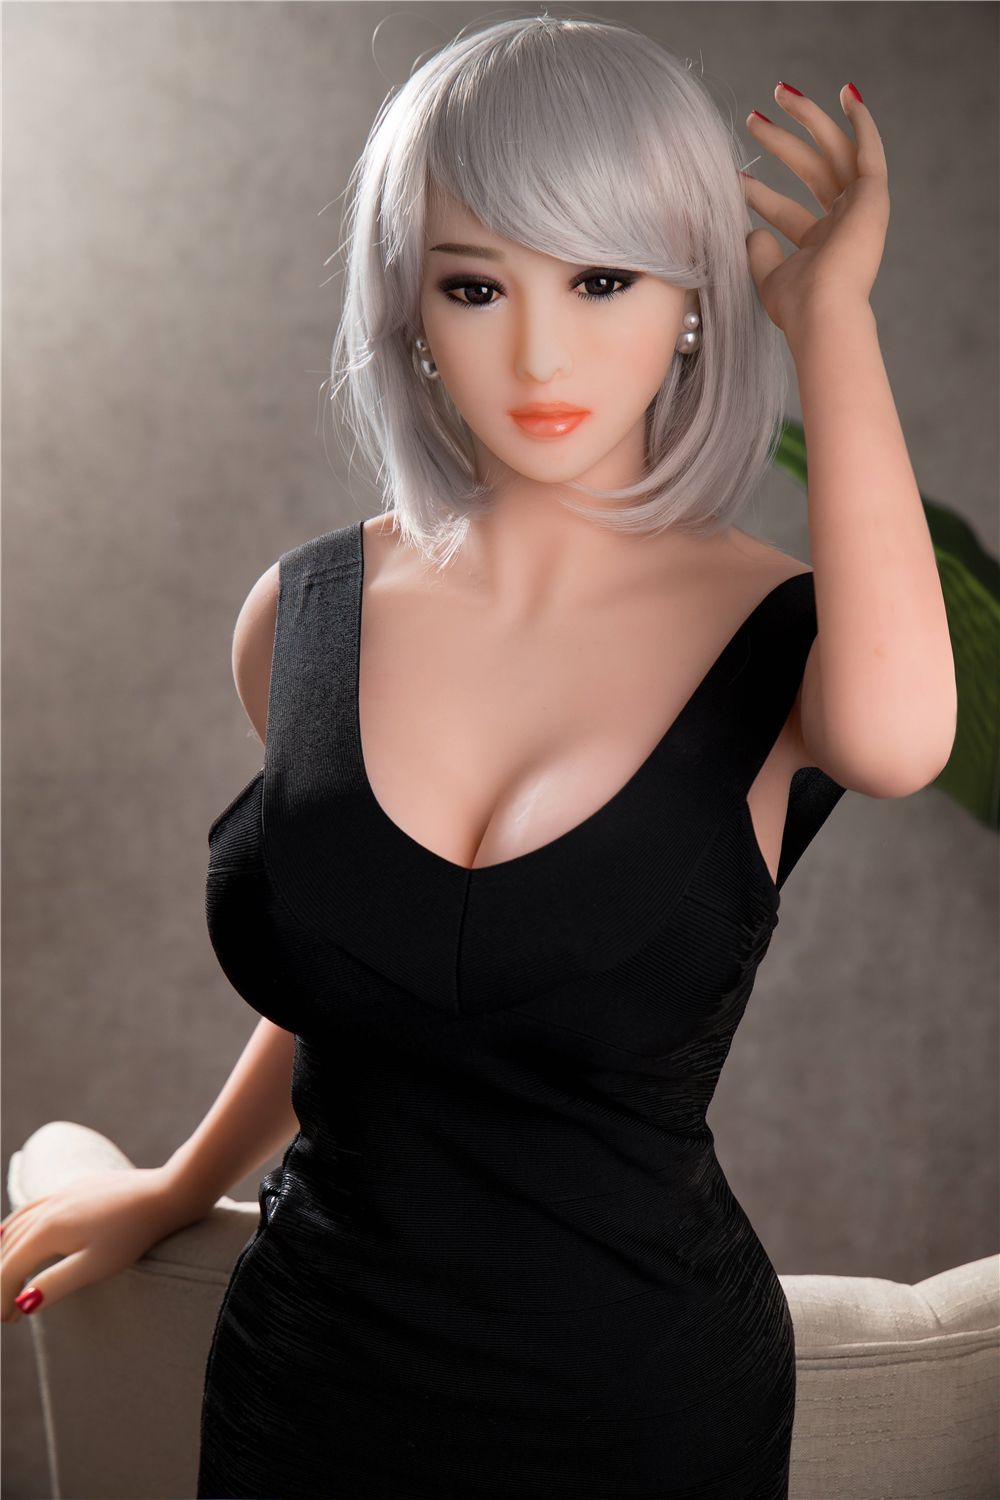 140cm Sexy Hot Girl Big Boobs Japan Full Silicone Sex Doll For Porn Men  Masturbation Sex Toys From Szfansai, $321.67 | DHgate.Com